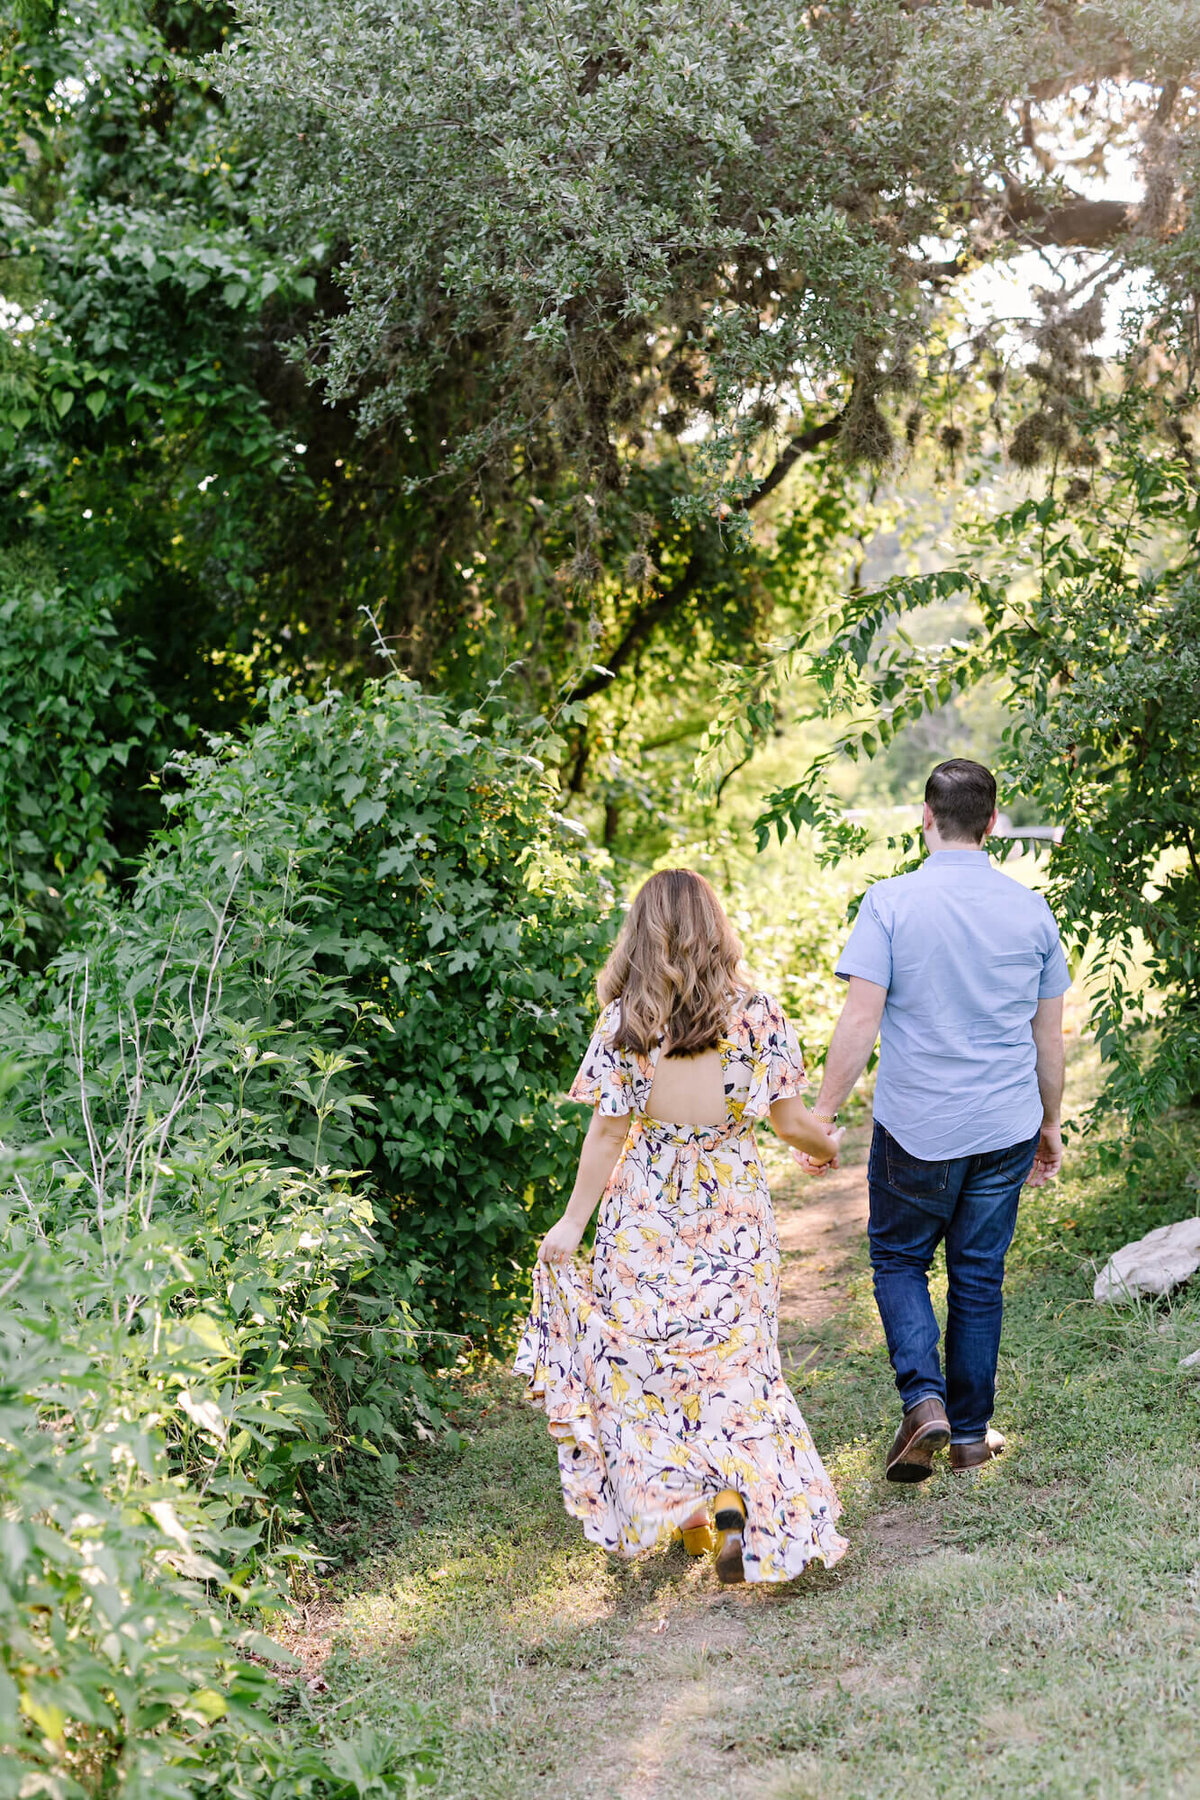 An outdoor engagement session at Bull Creek Park